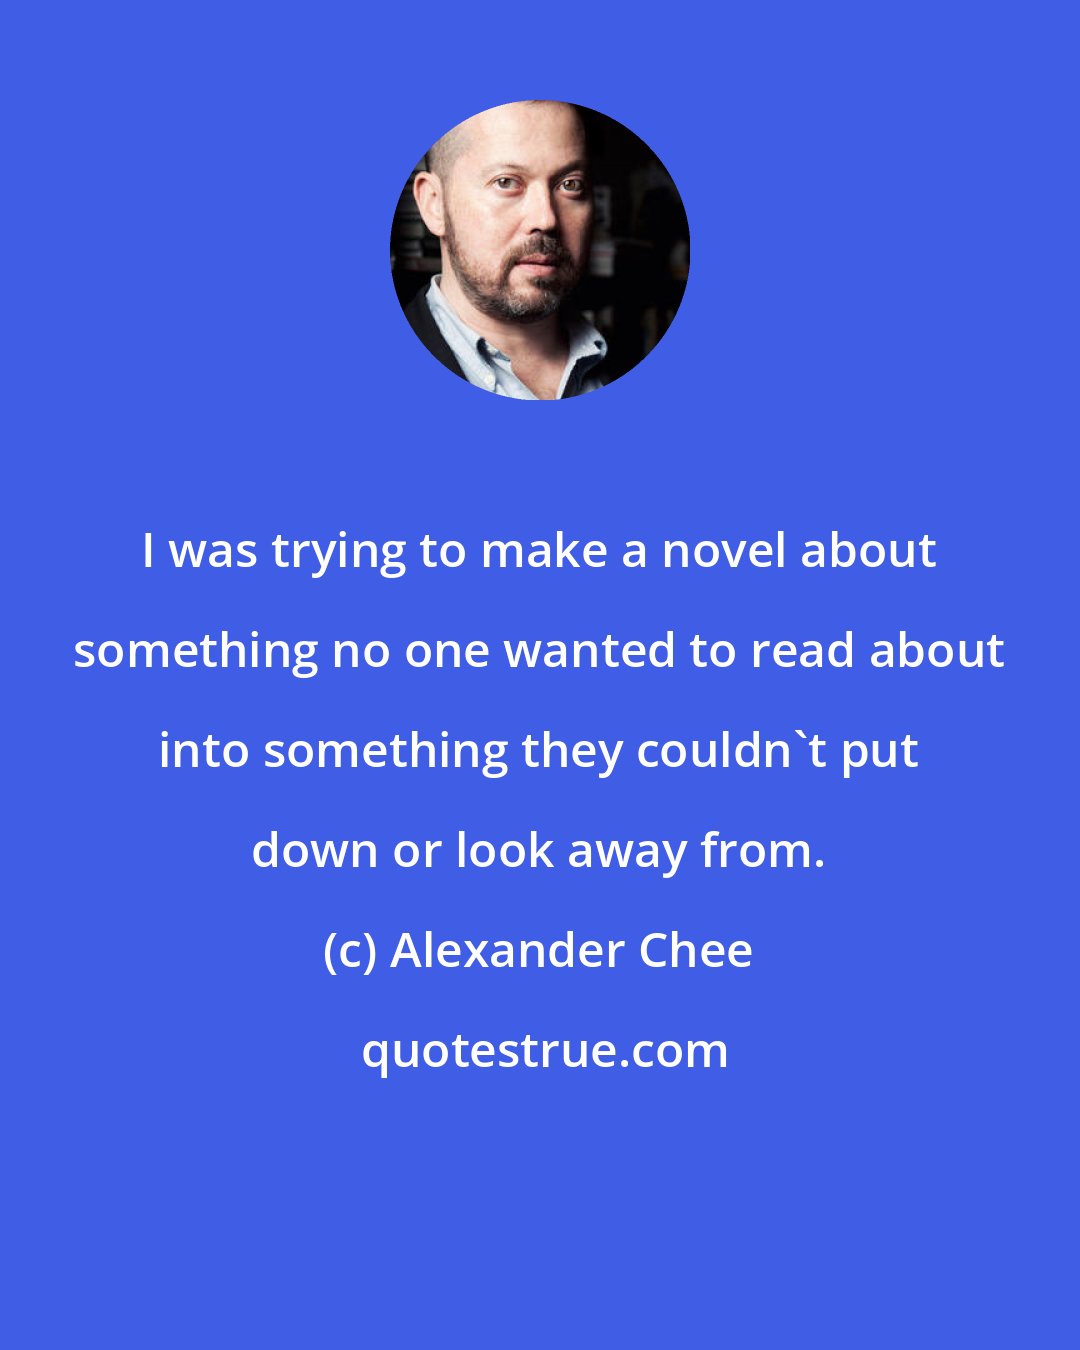 Alexander Chee: I was trying to make a novel about something no one wanted to read about into something they couldn't put down or look away from.